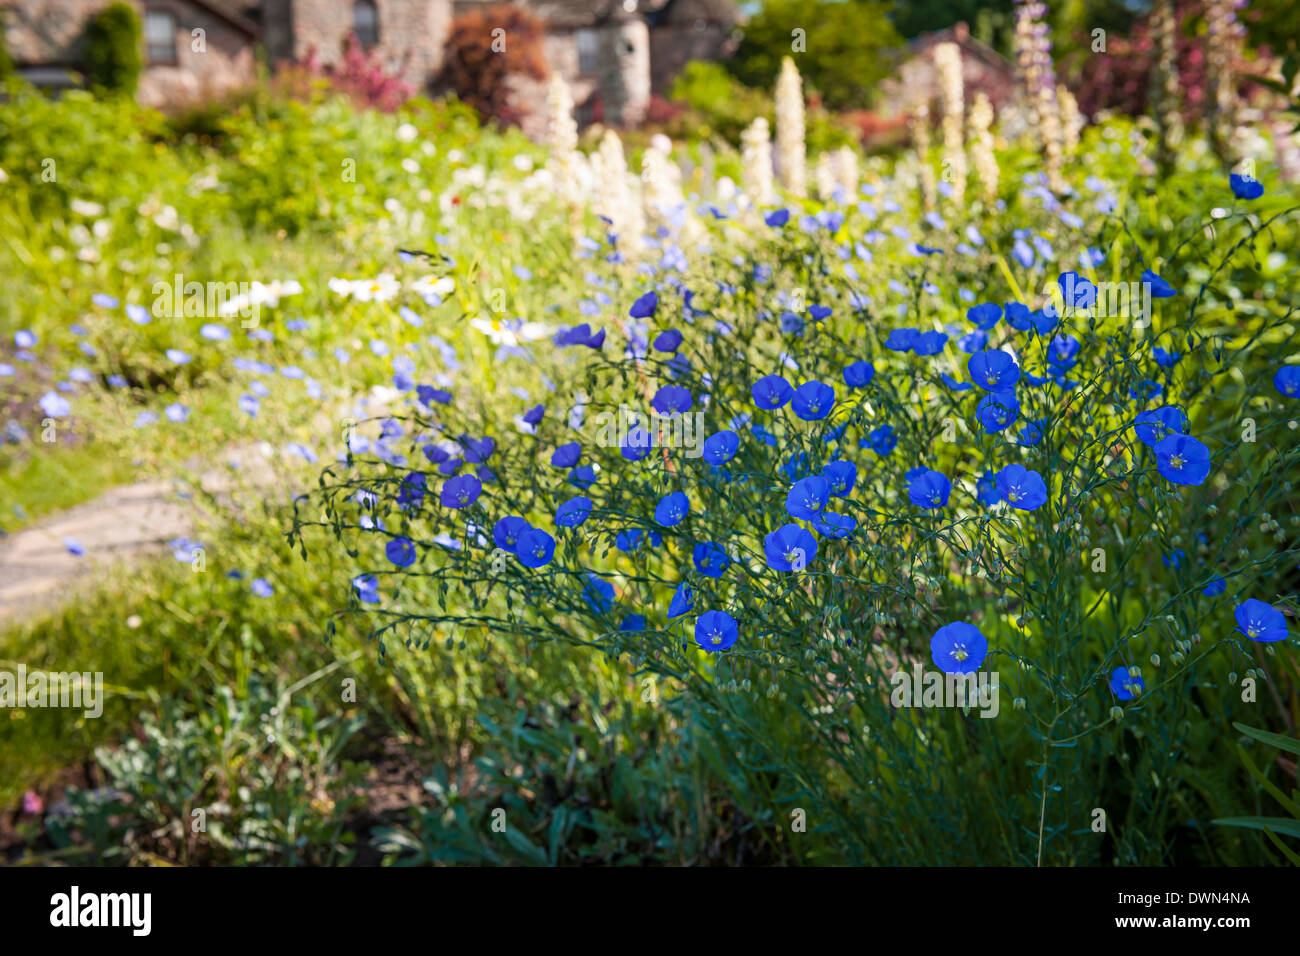 Blue flax flowers blooming along path in summer garden Stock Photo